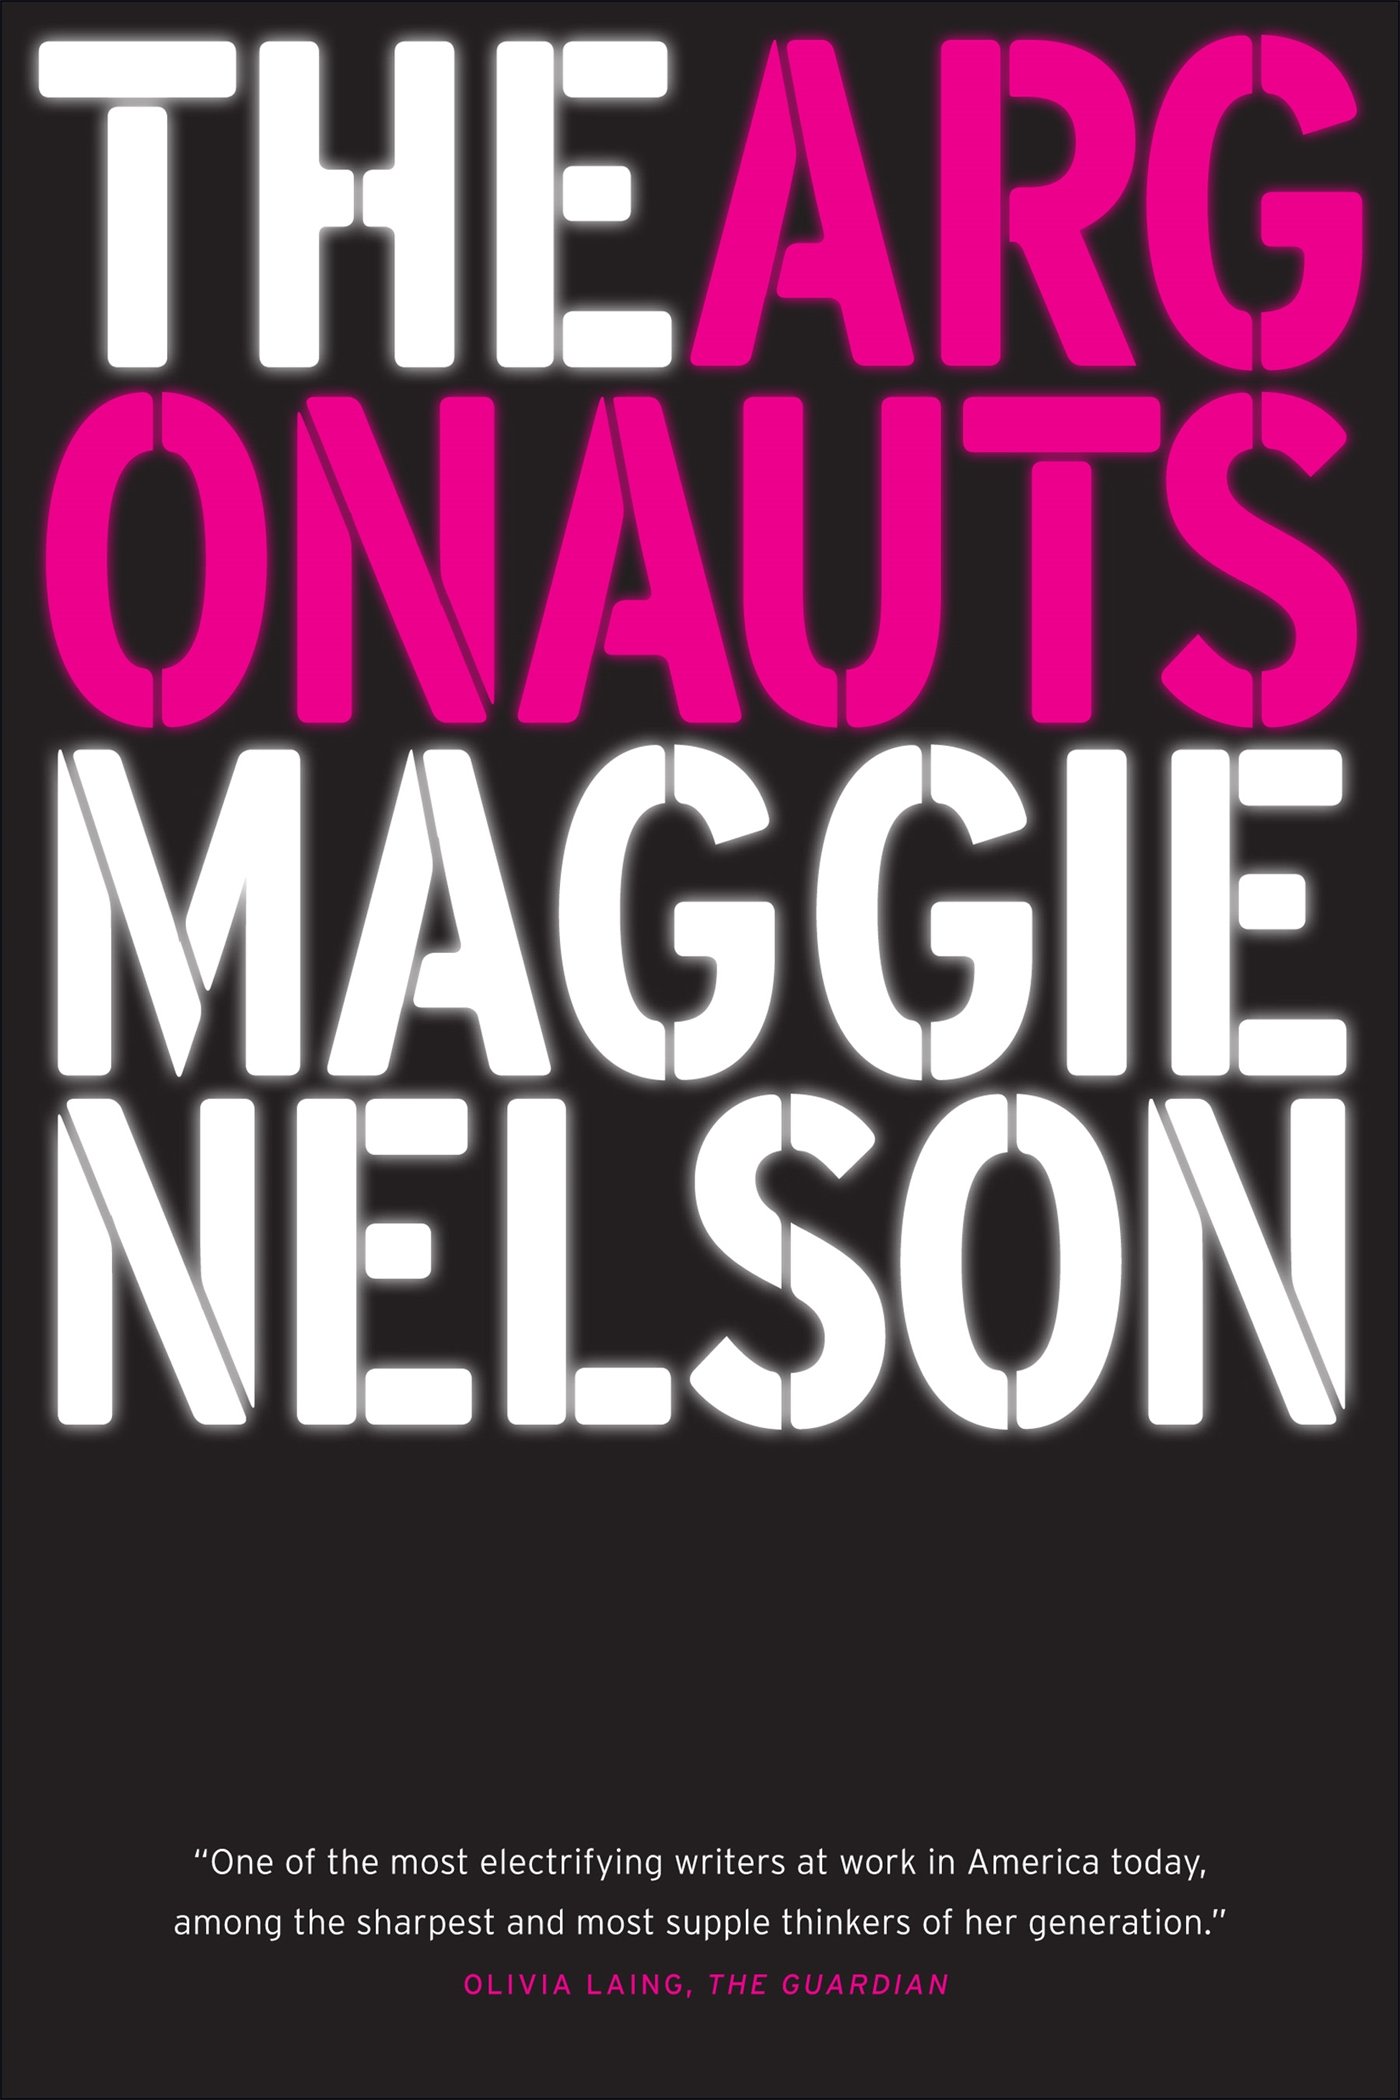 In search of nuance with Maggie Nelson